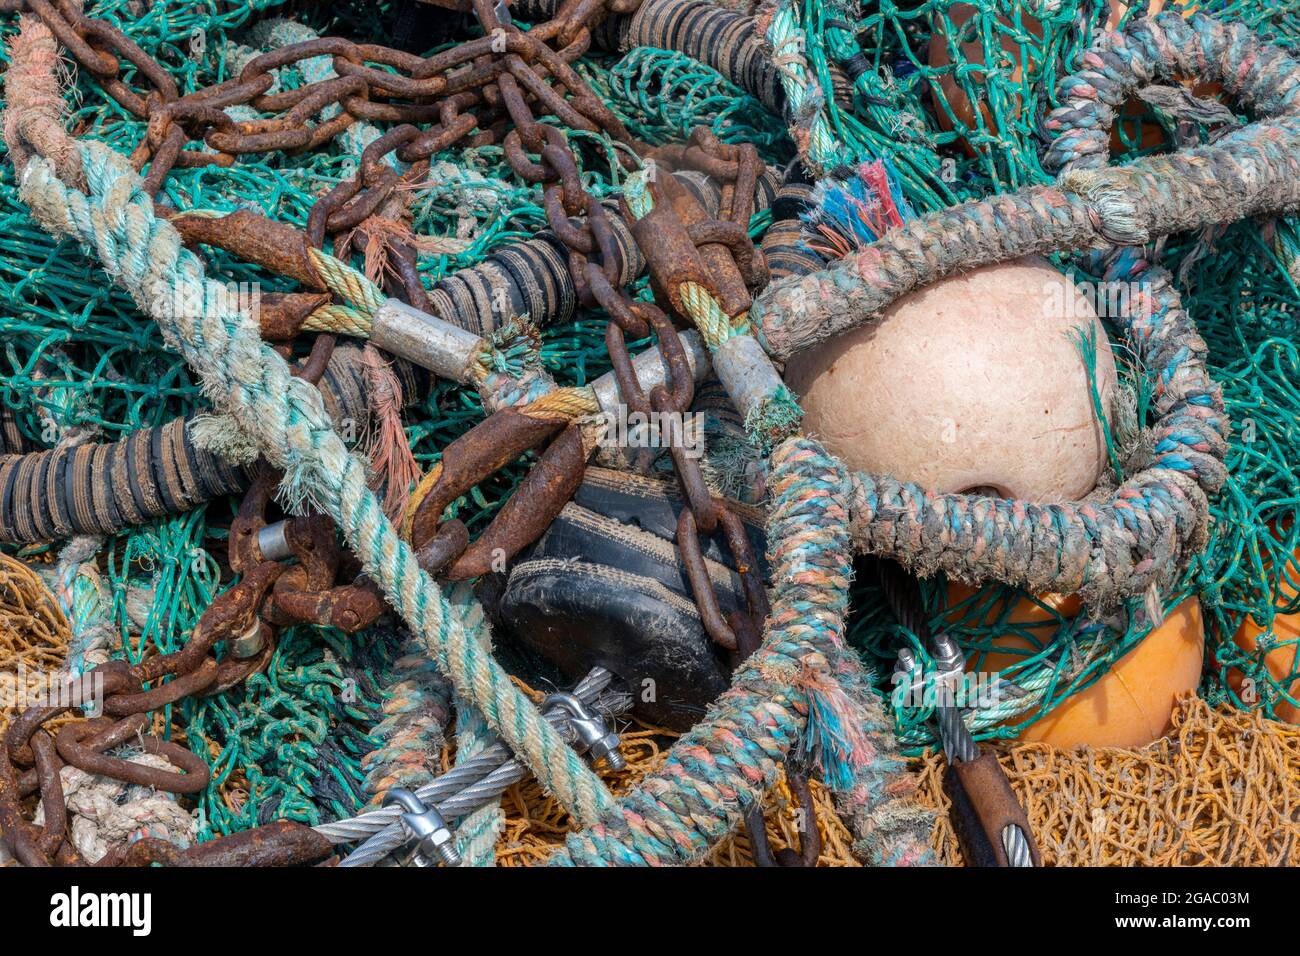 https://c8.alamy.com/comp/2GAC03M/ropes-and-chains-fishing-gear-fishing-nets-and-chains-fishing-equipment-fishing-trawler-nets-and-wires-background-abstract-fishing-nets-2GAC03M.jpg